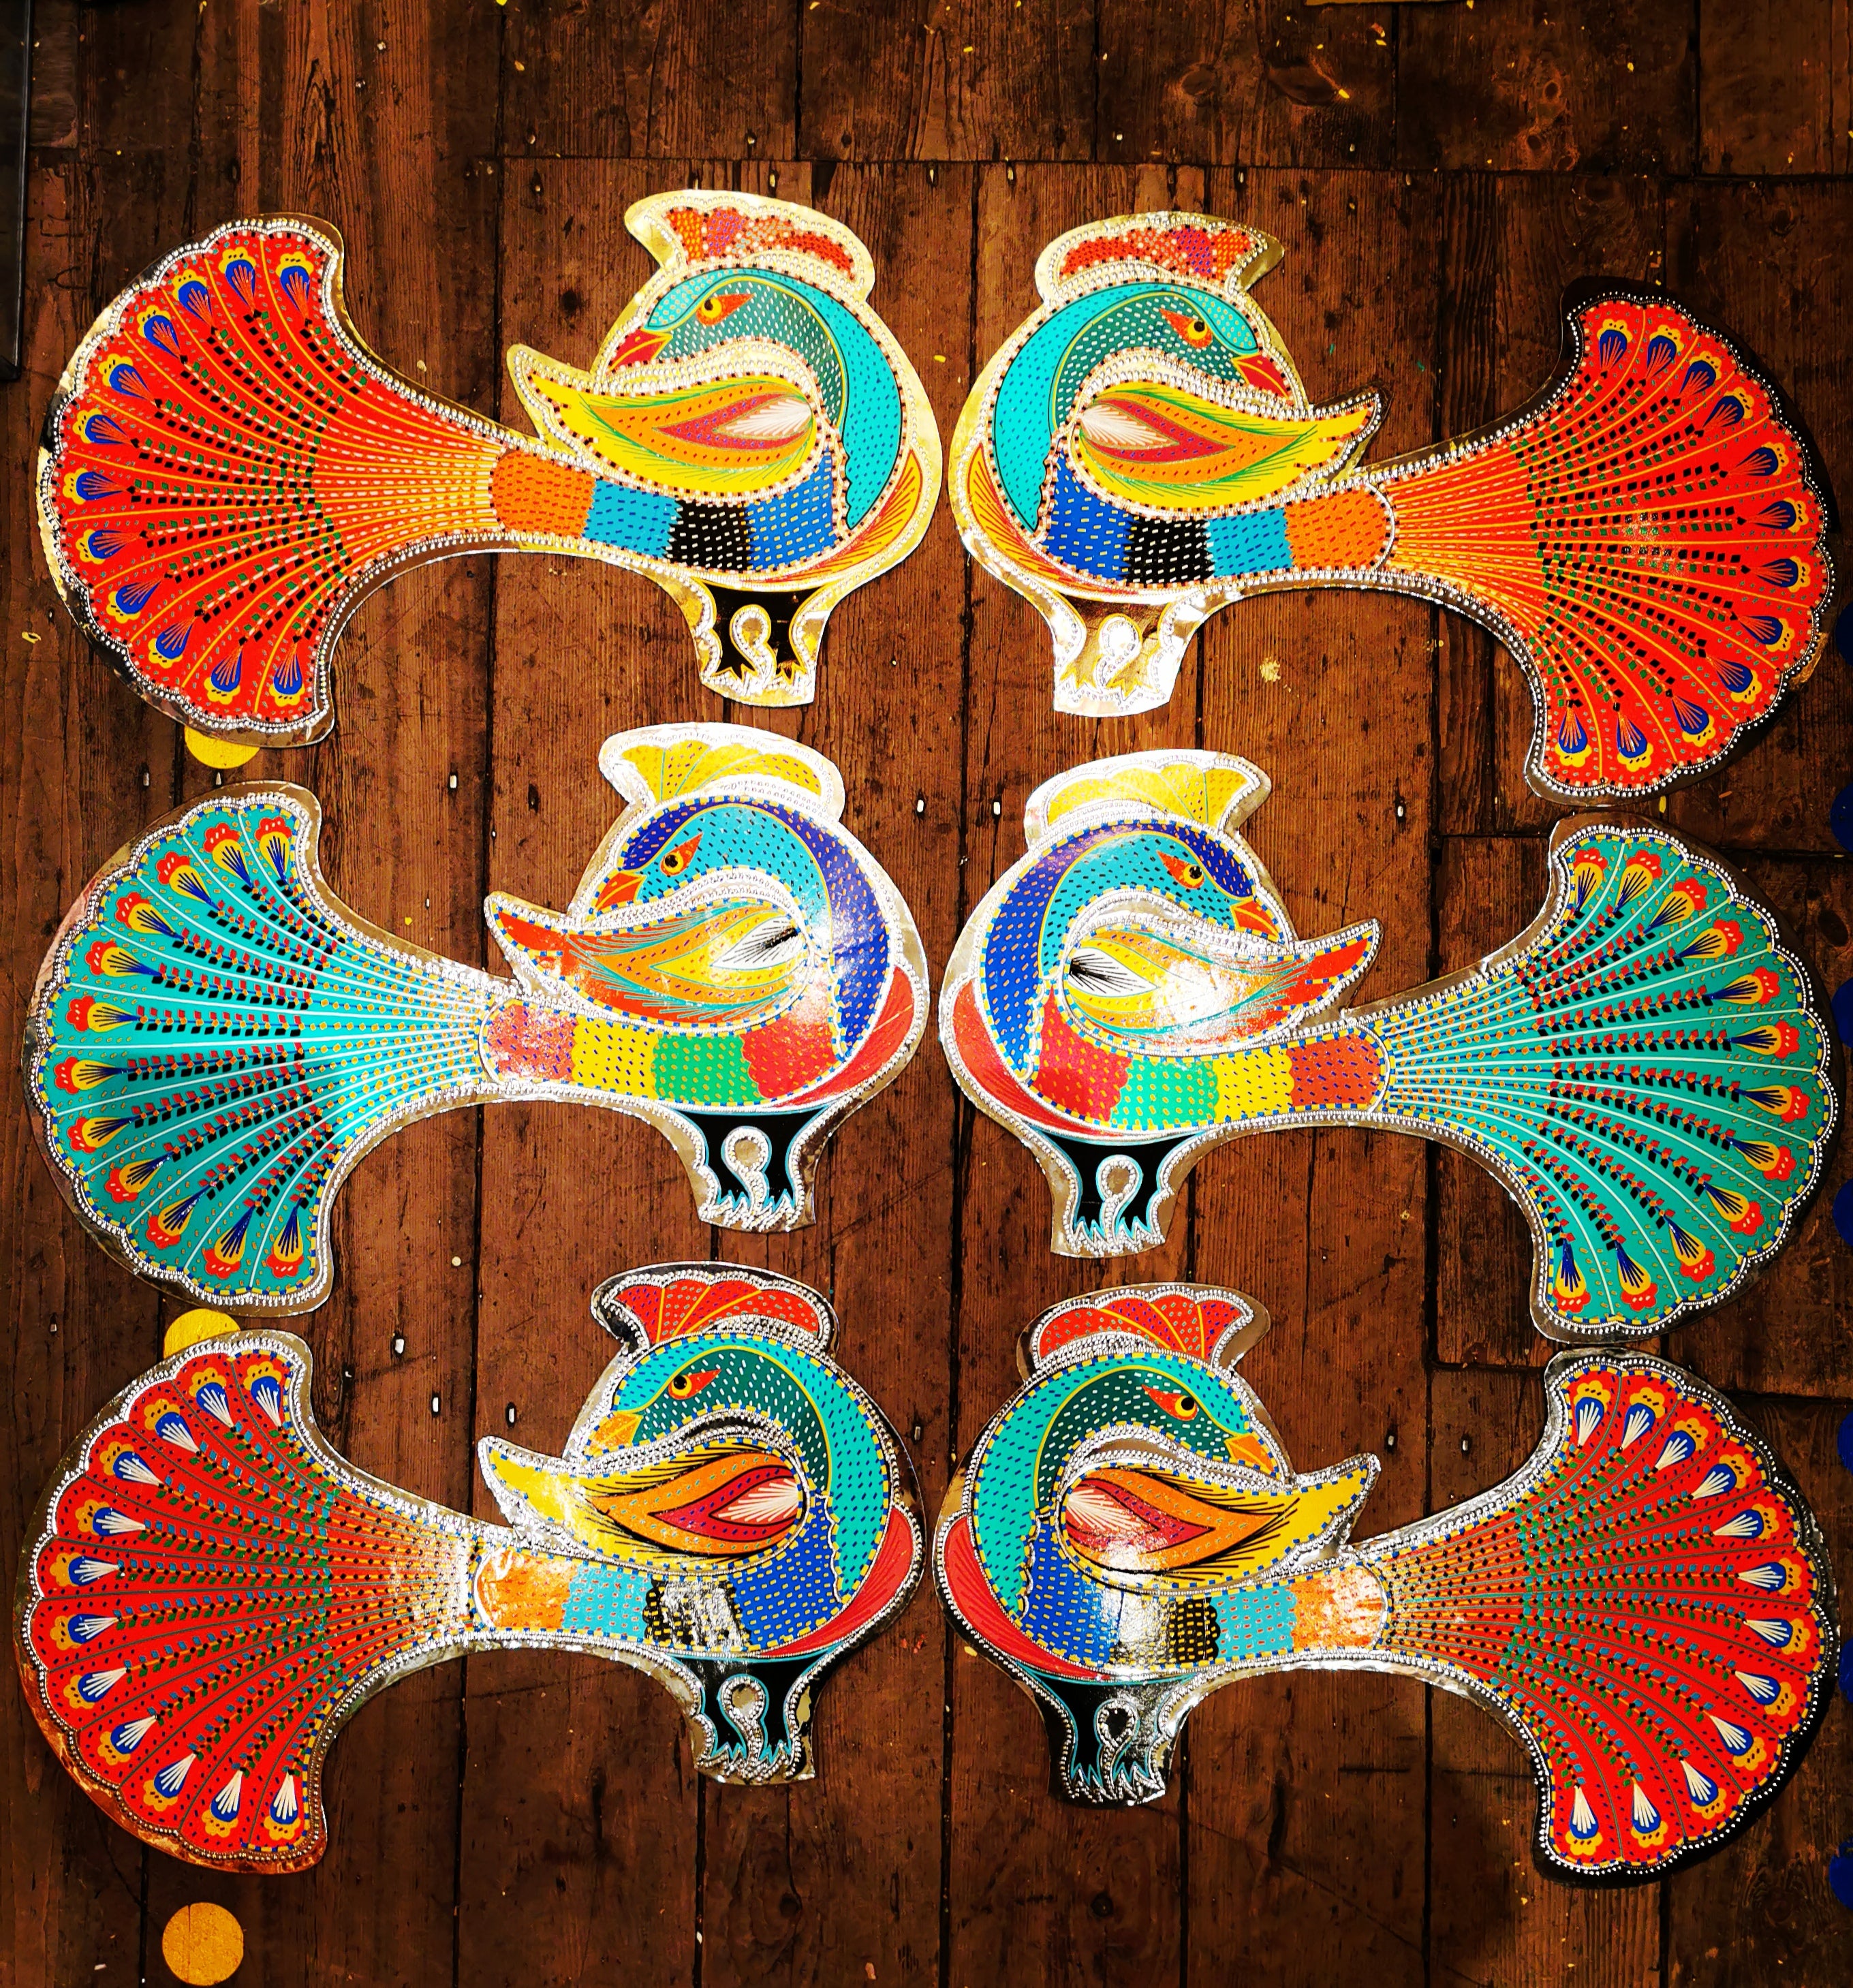 Fabulous peacock metal wall plaques, handmade in Pakistan by truck artists. Decorated beautifully with hand cut vinyl reflective stickers.